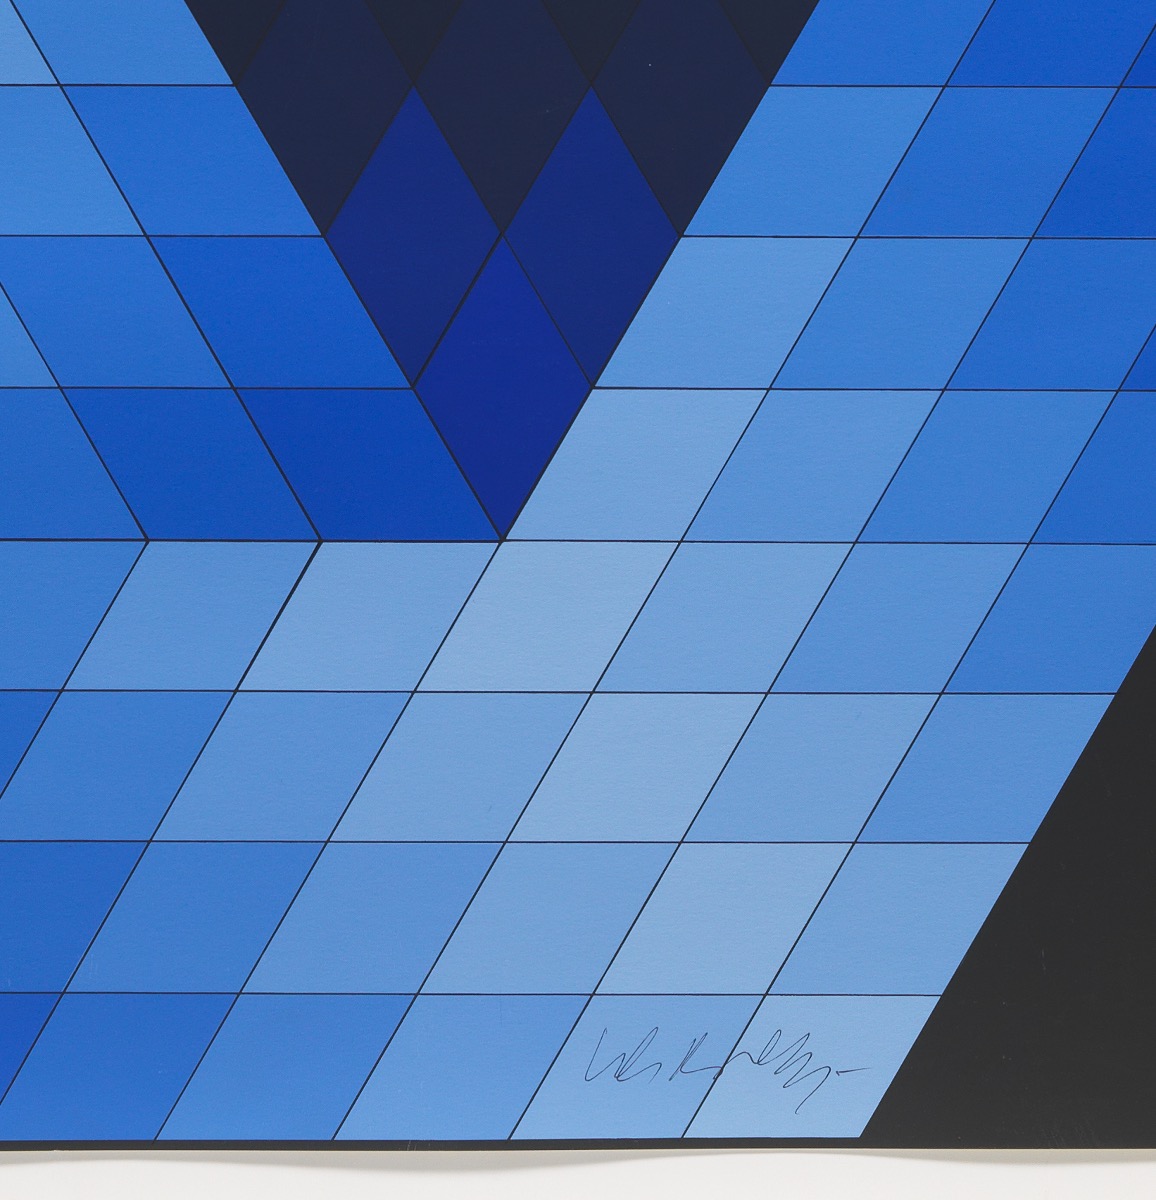 Victor Vasarely (French, 1908-1997) - Image 3 of 4